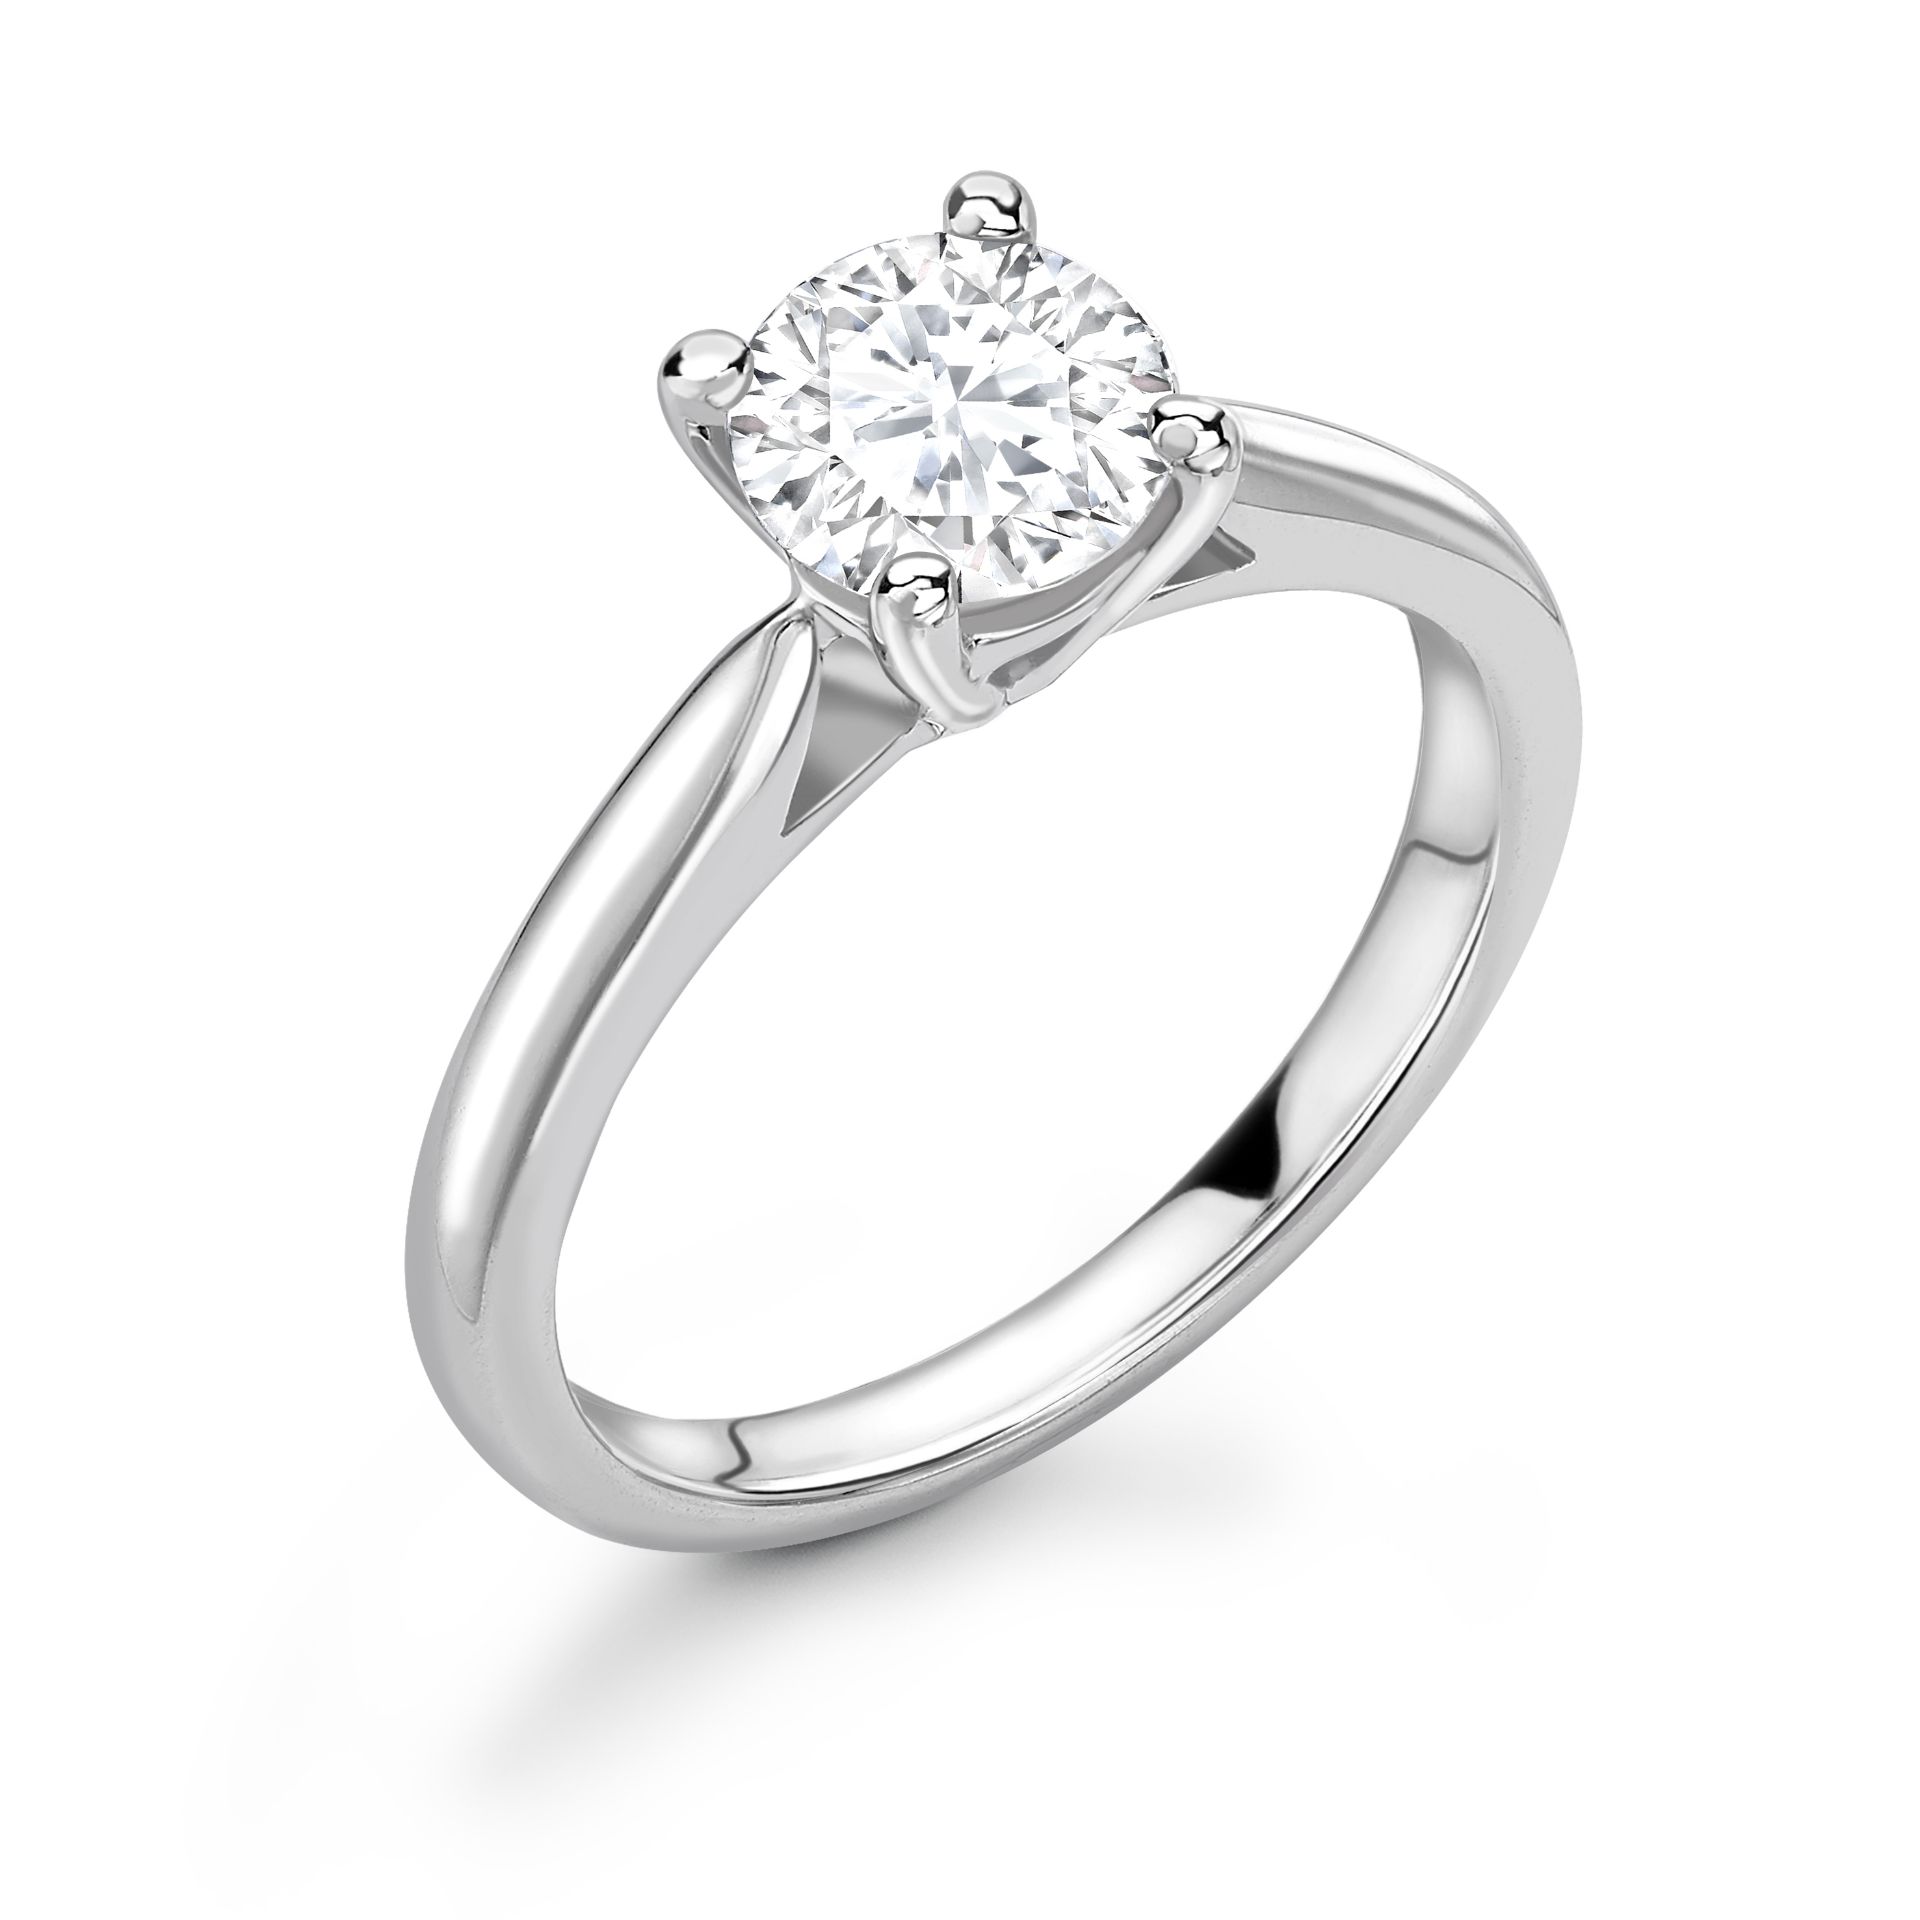 18ct White Gold Single Stone Claw Set Diamond Ring 0.50 Carats - Valued by AGI £5,349.00 - A